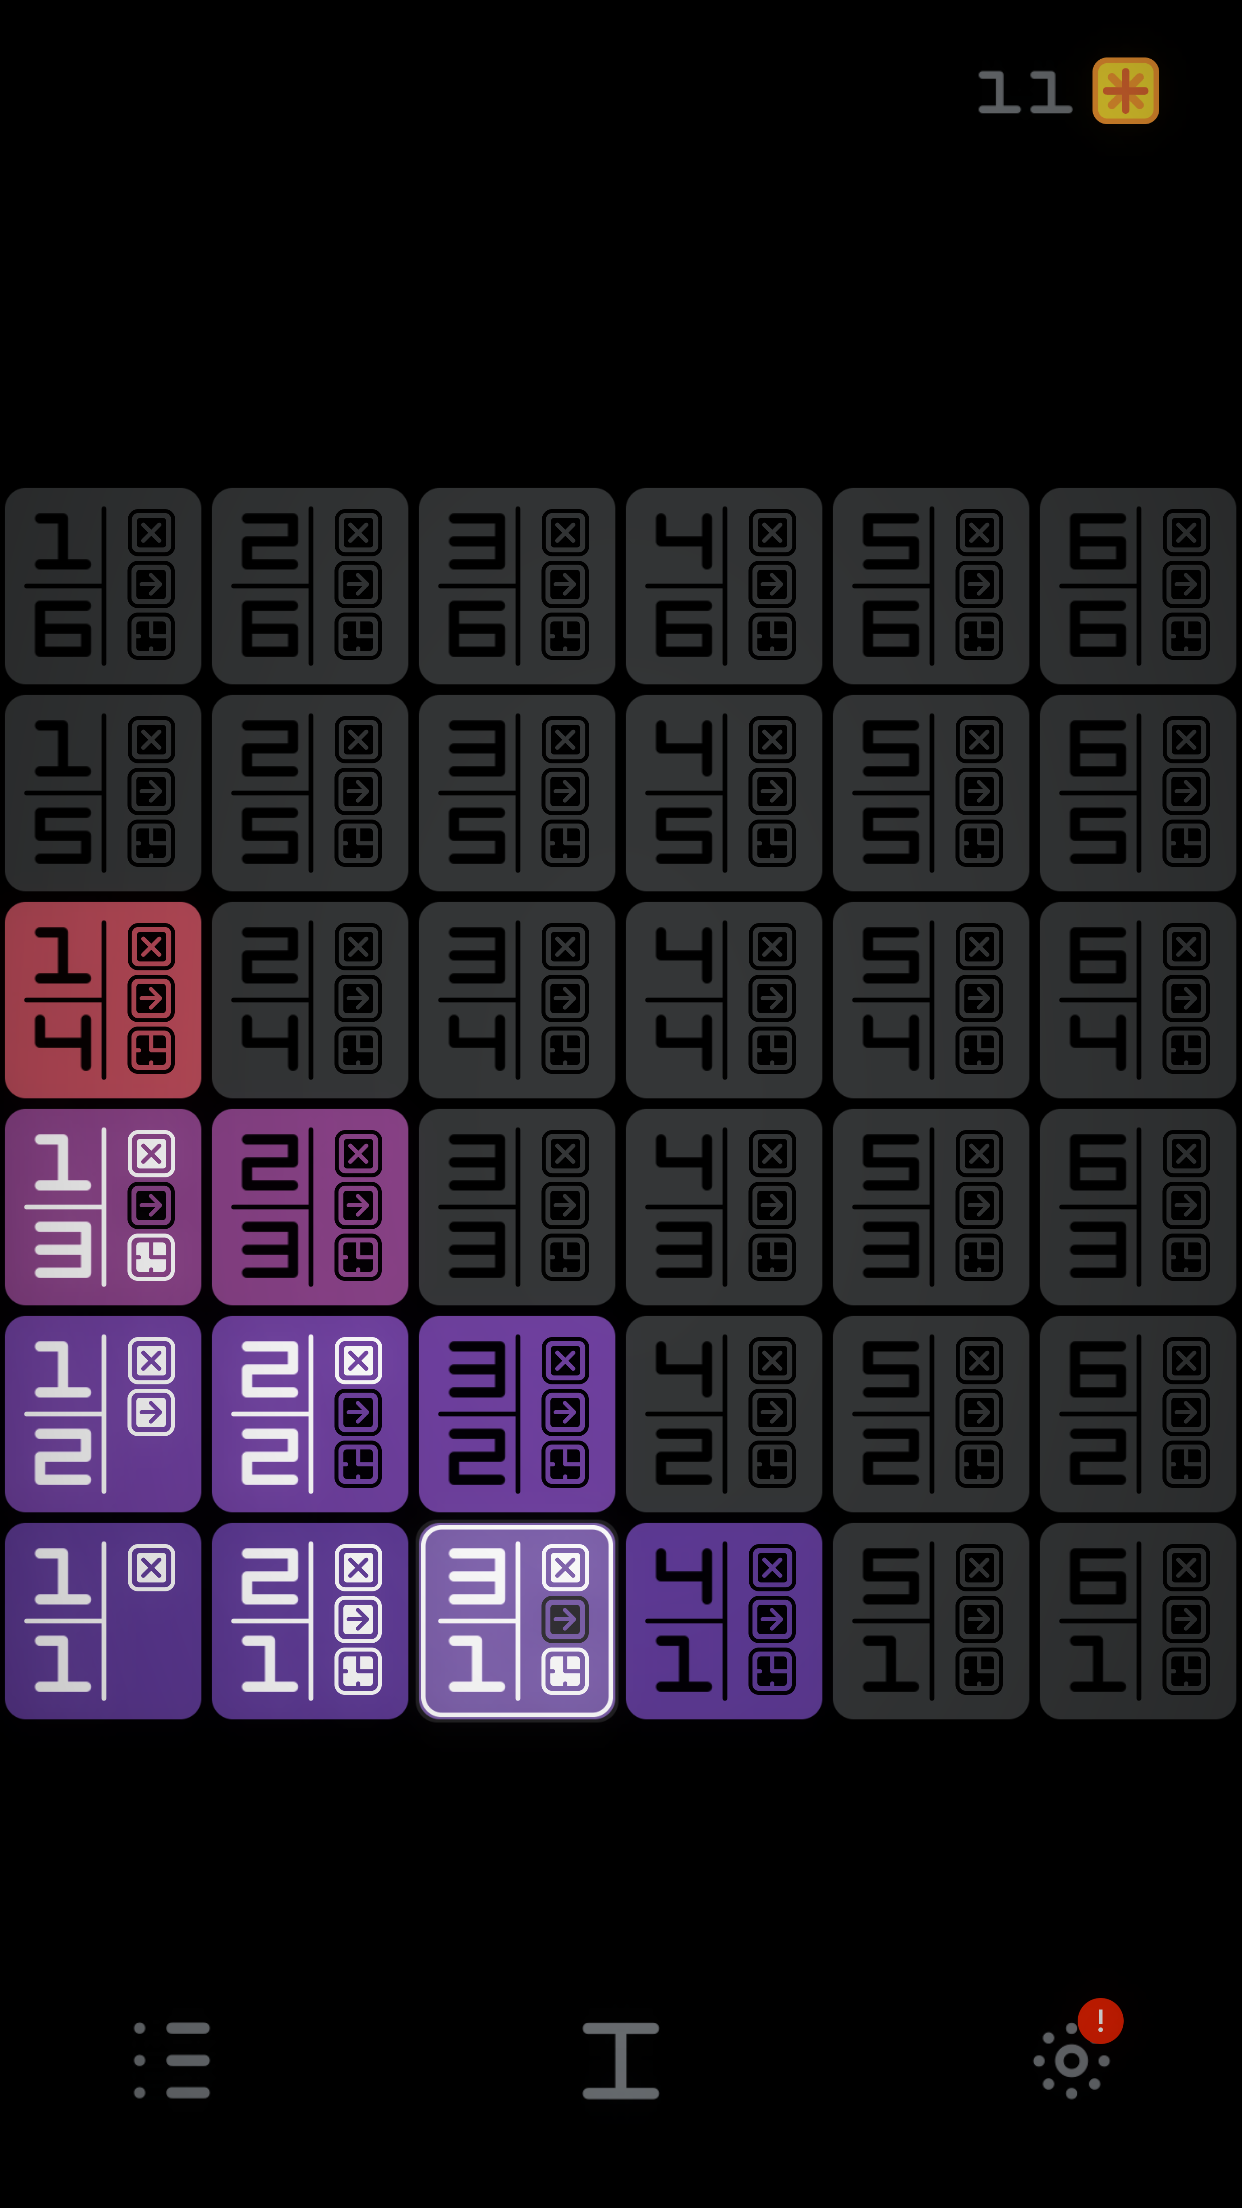 05-Resynth-iPhone-T1-DK-05.png